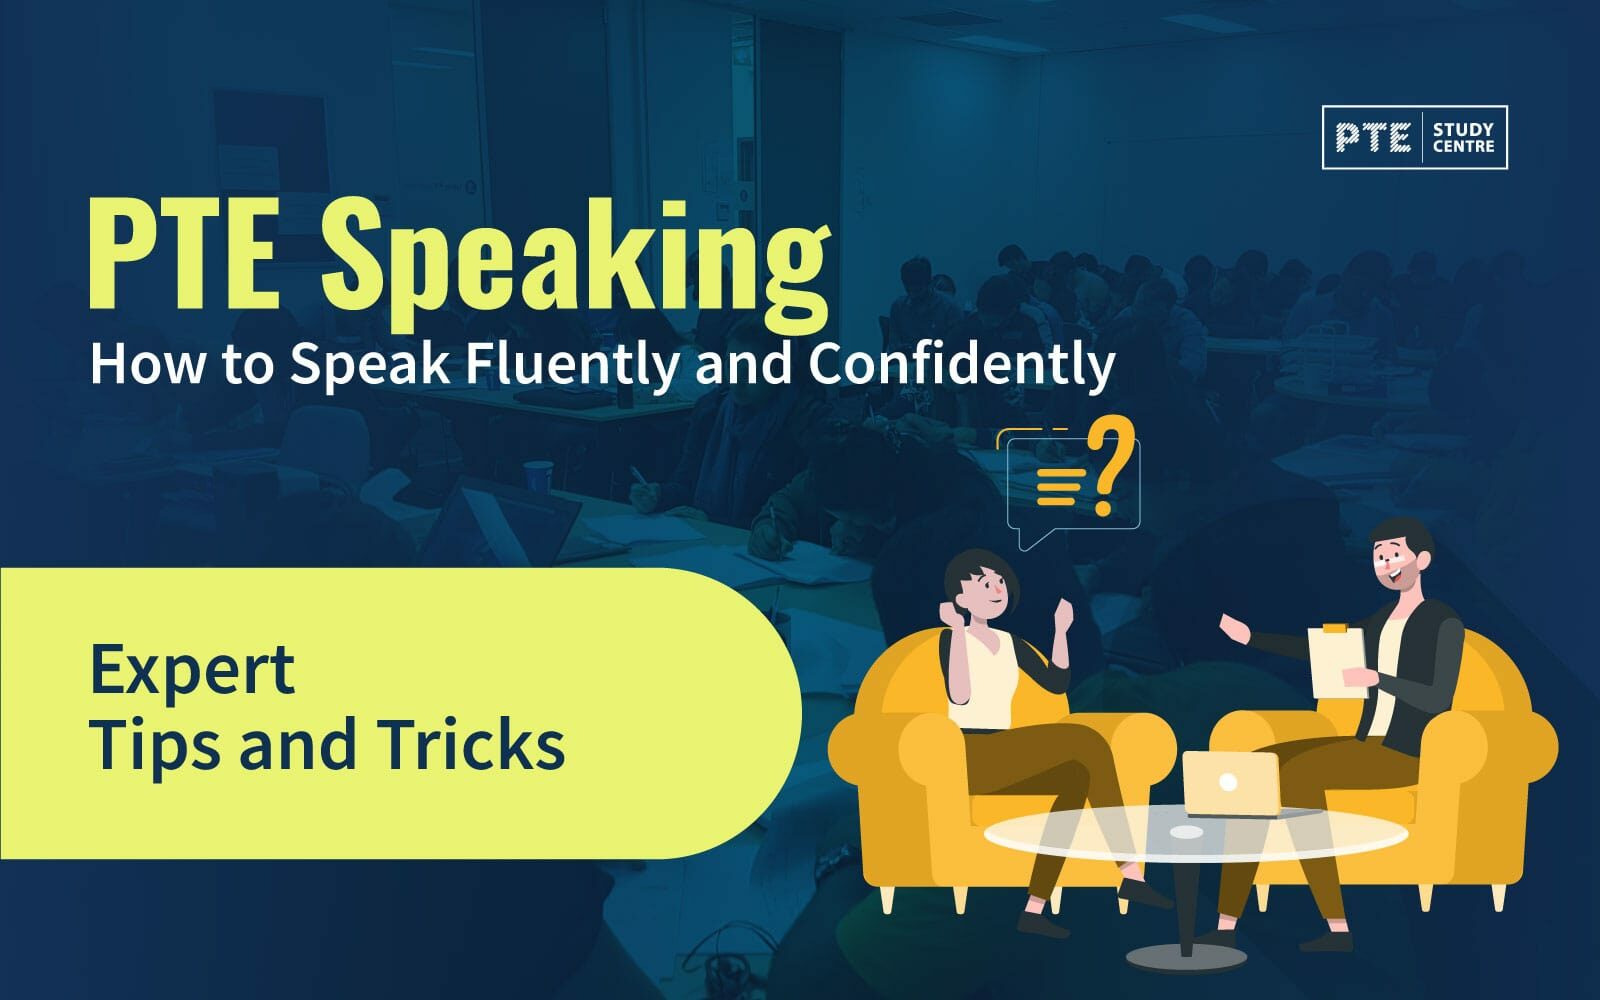 PTE Speaking: How to Speak Fluently and Confidently image